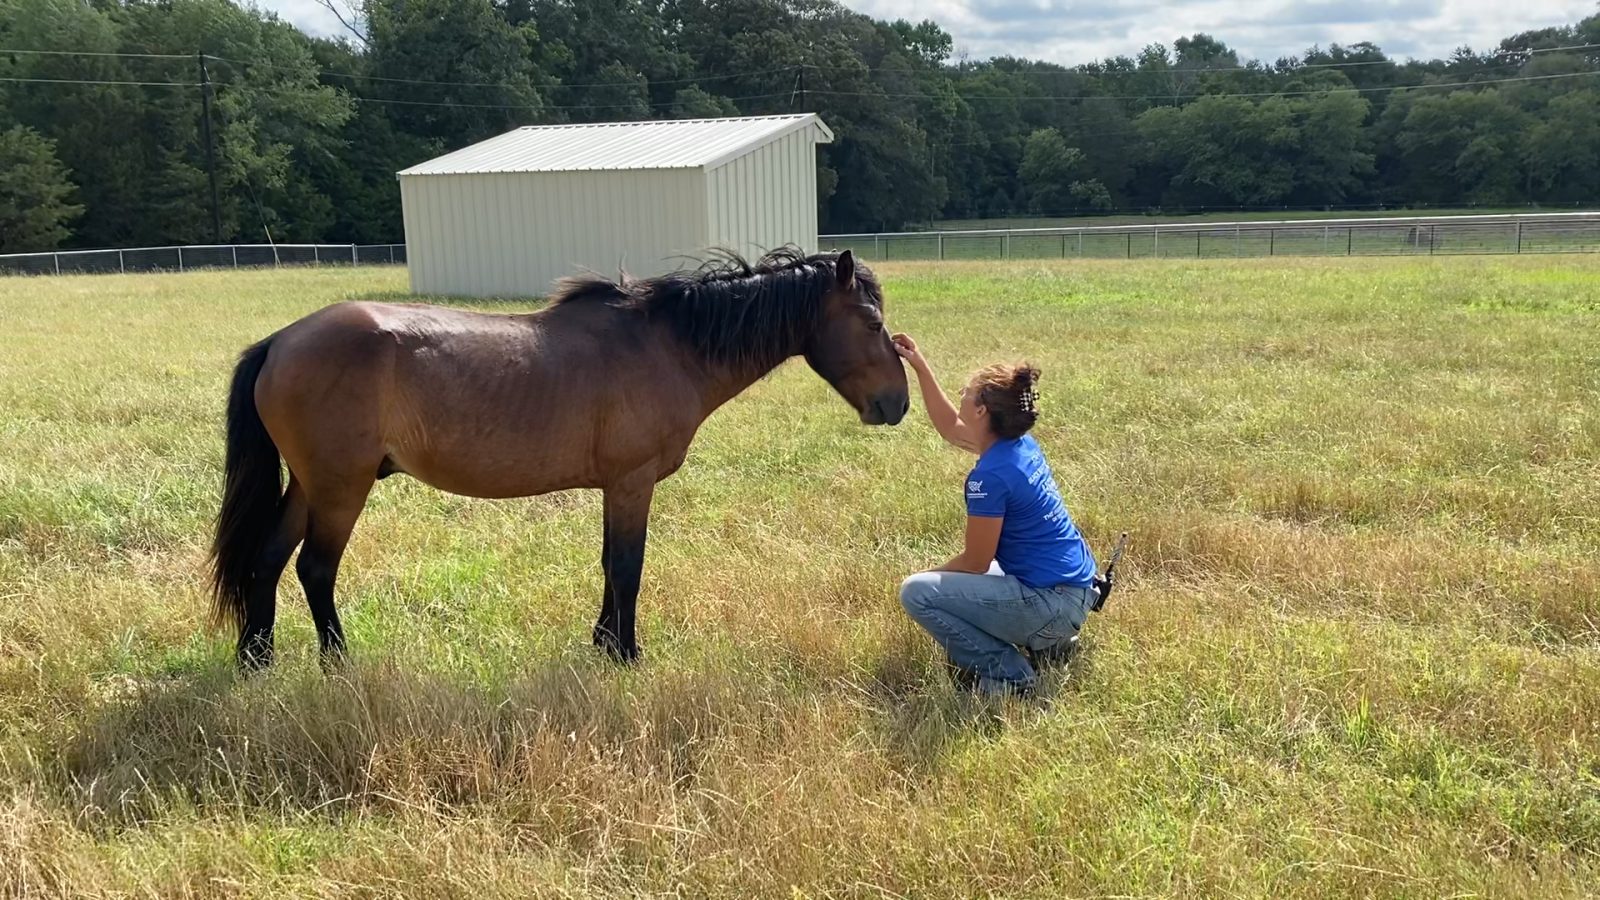 Woman petting horse in a field